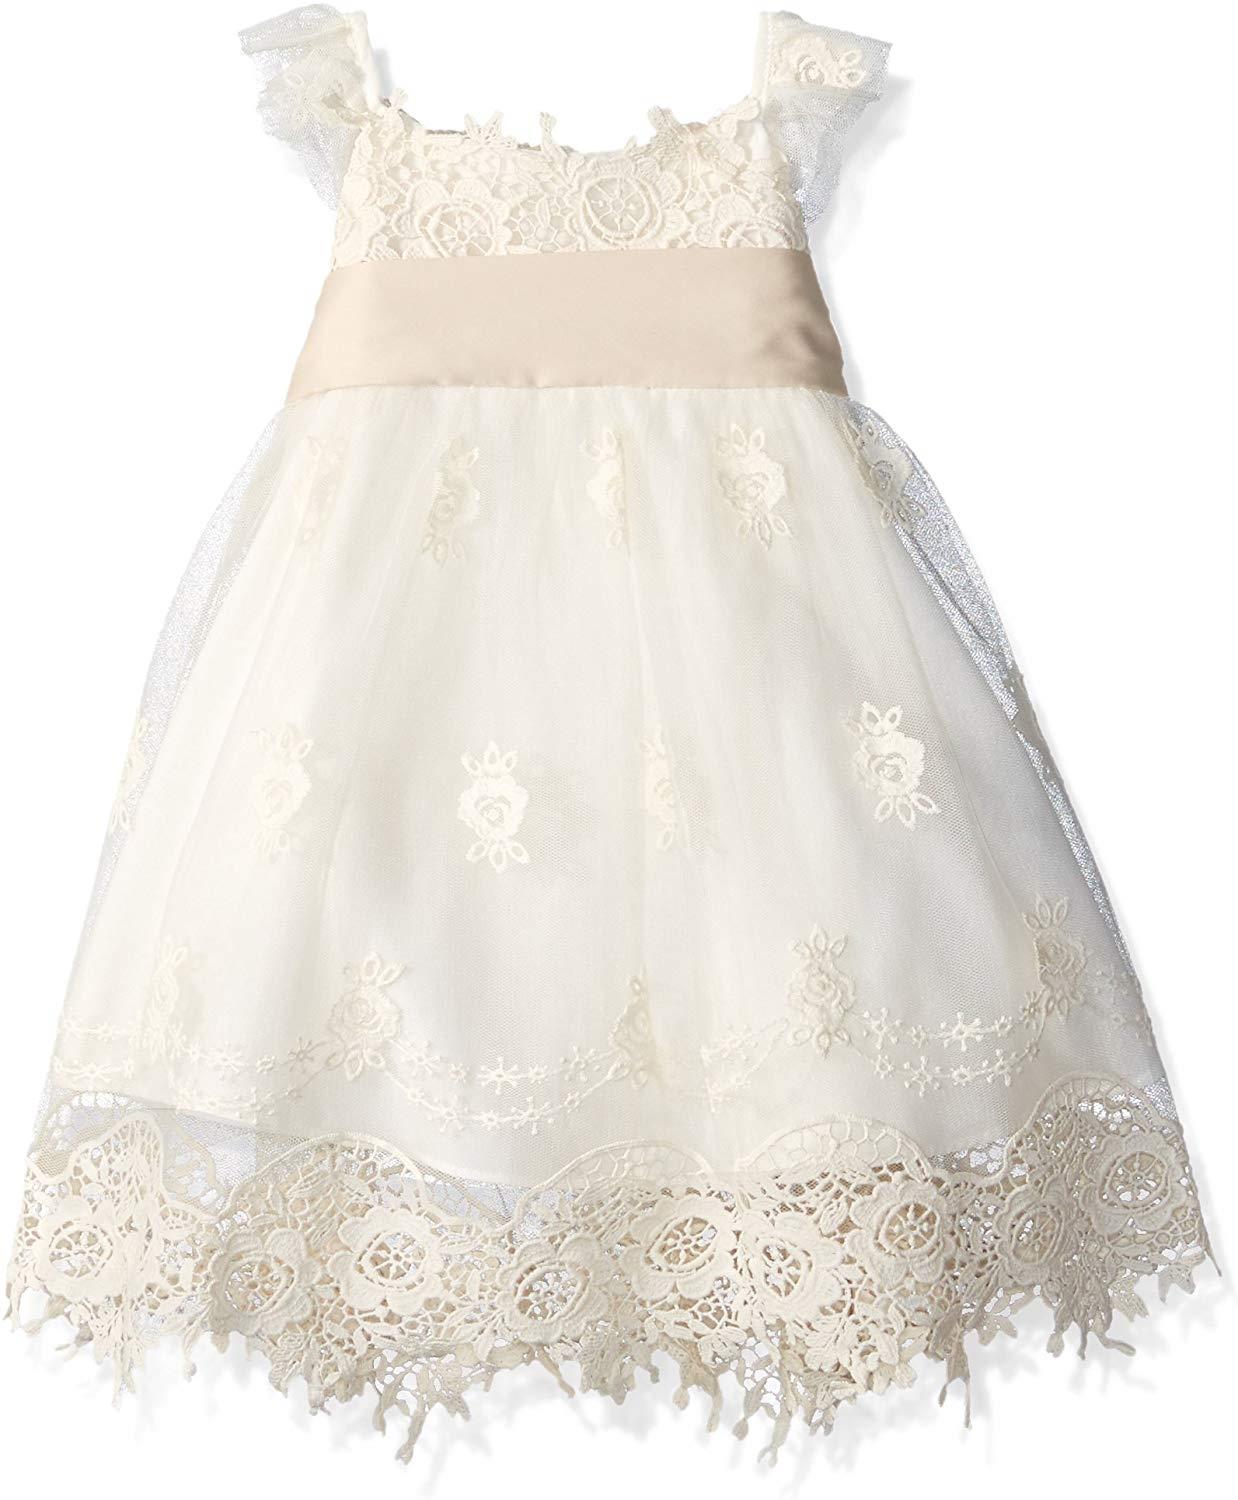 KATE MACK AND BISCOTTI KIDS GIRLS EMBROIDERED TULLE DRESS 5 YEARS